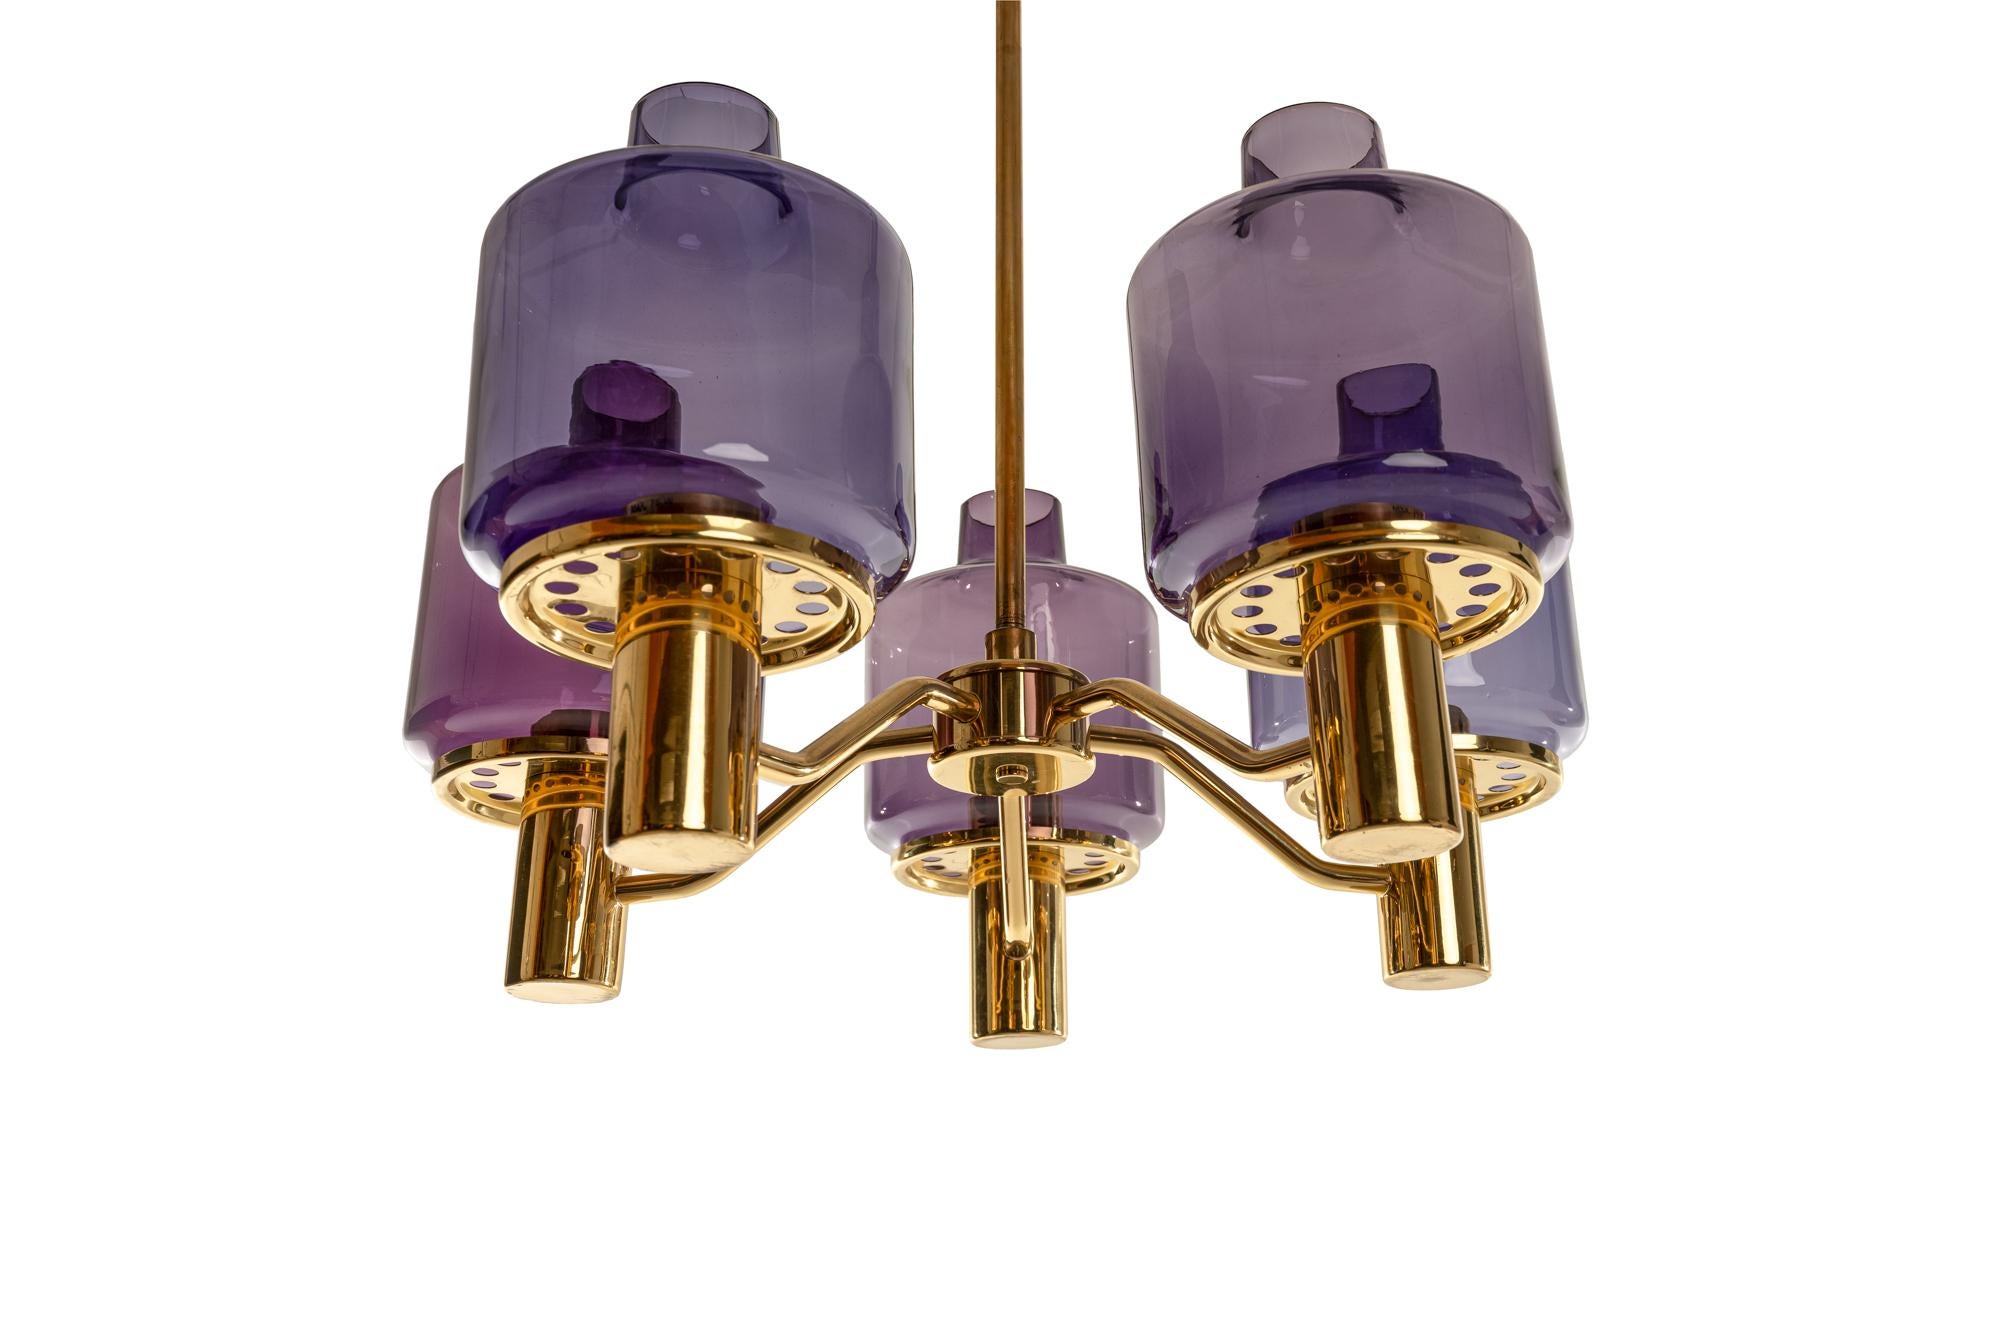 Beautiful Hans Anne Jakobsson design, 1960s pair of brass pendant lamps,
two pieces, all glass shades intact , no damages.
